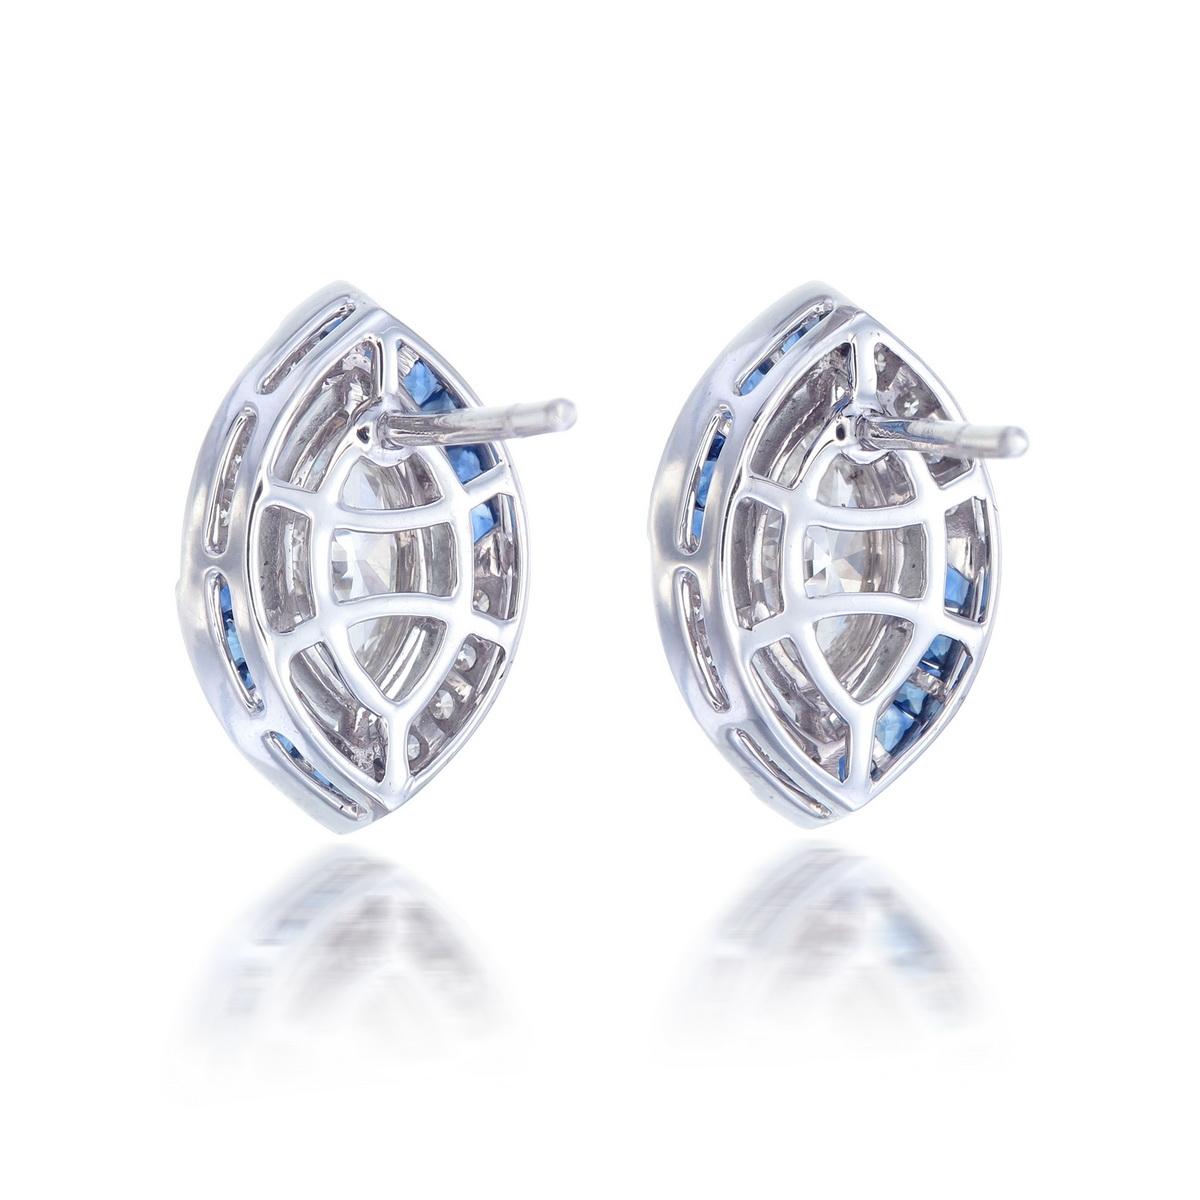 A new pair of diamond and blue sapphire earrings inspired by art-deco themes made in 18 Karat White Gold. 

The two center marquise diamonds weigh approximately 1.31 carats total, with the sixteen supporting round diamonds weighing approximately